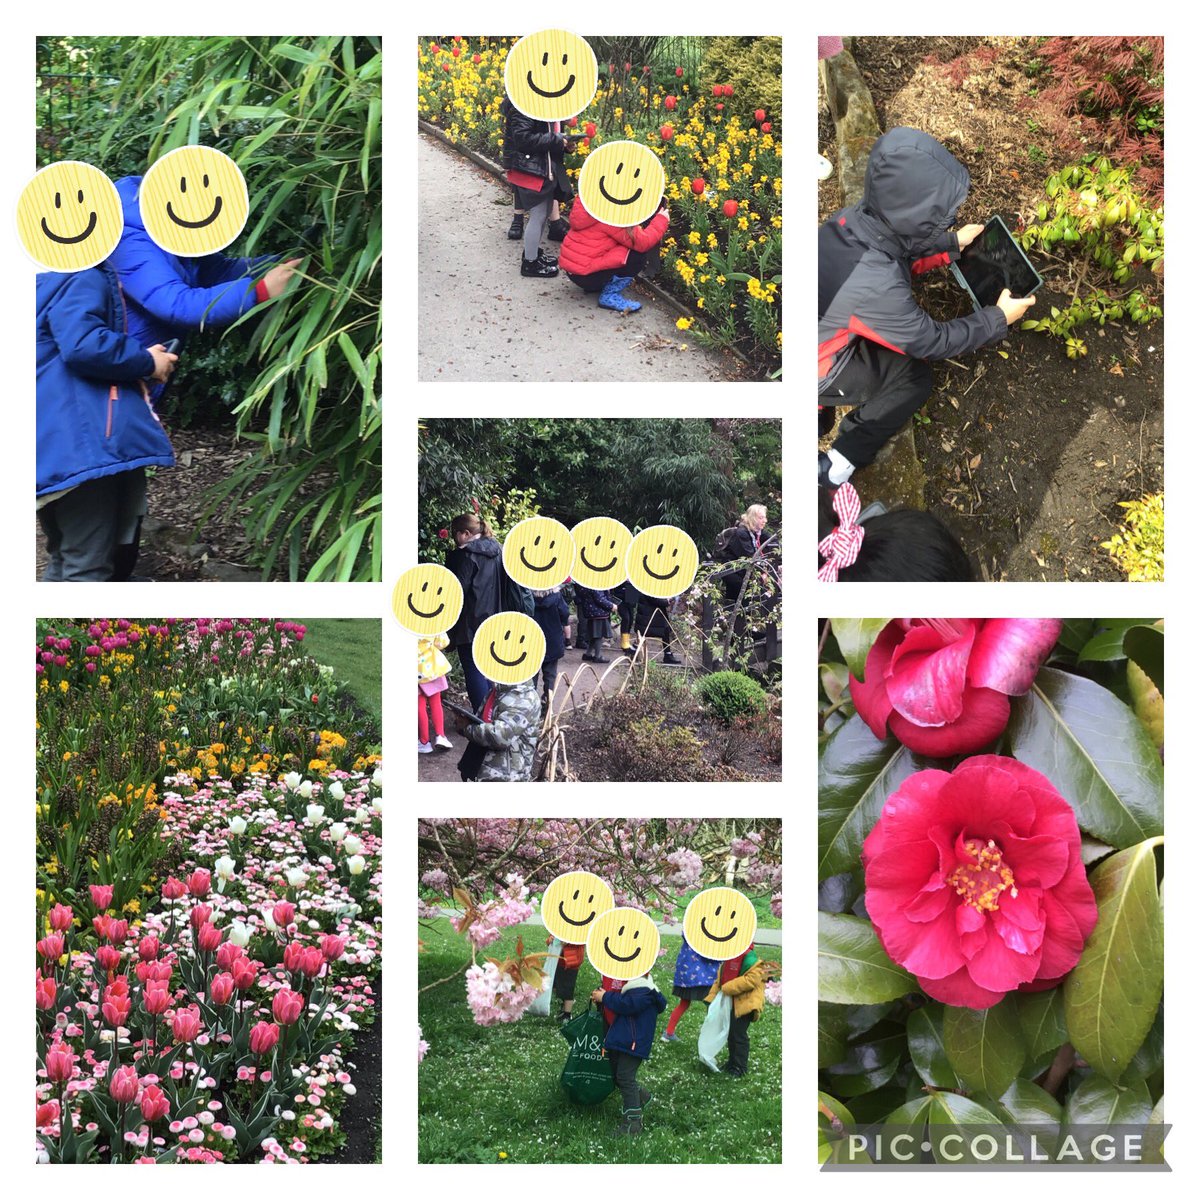 Year 1 @PrimaryWestern having a busy morning in the beautiful Valley Gardens. We’ve been taking pictures of plants for our Keynote presentations and collecting natural resources for our @goldsworthy_art inspired artwork later this week. #nature #valleygardens #loveyourlocalarea